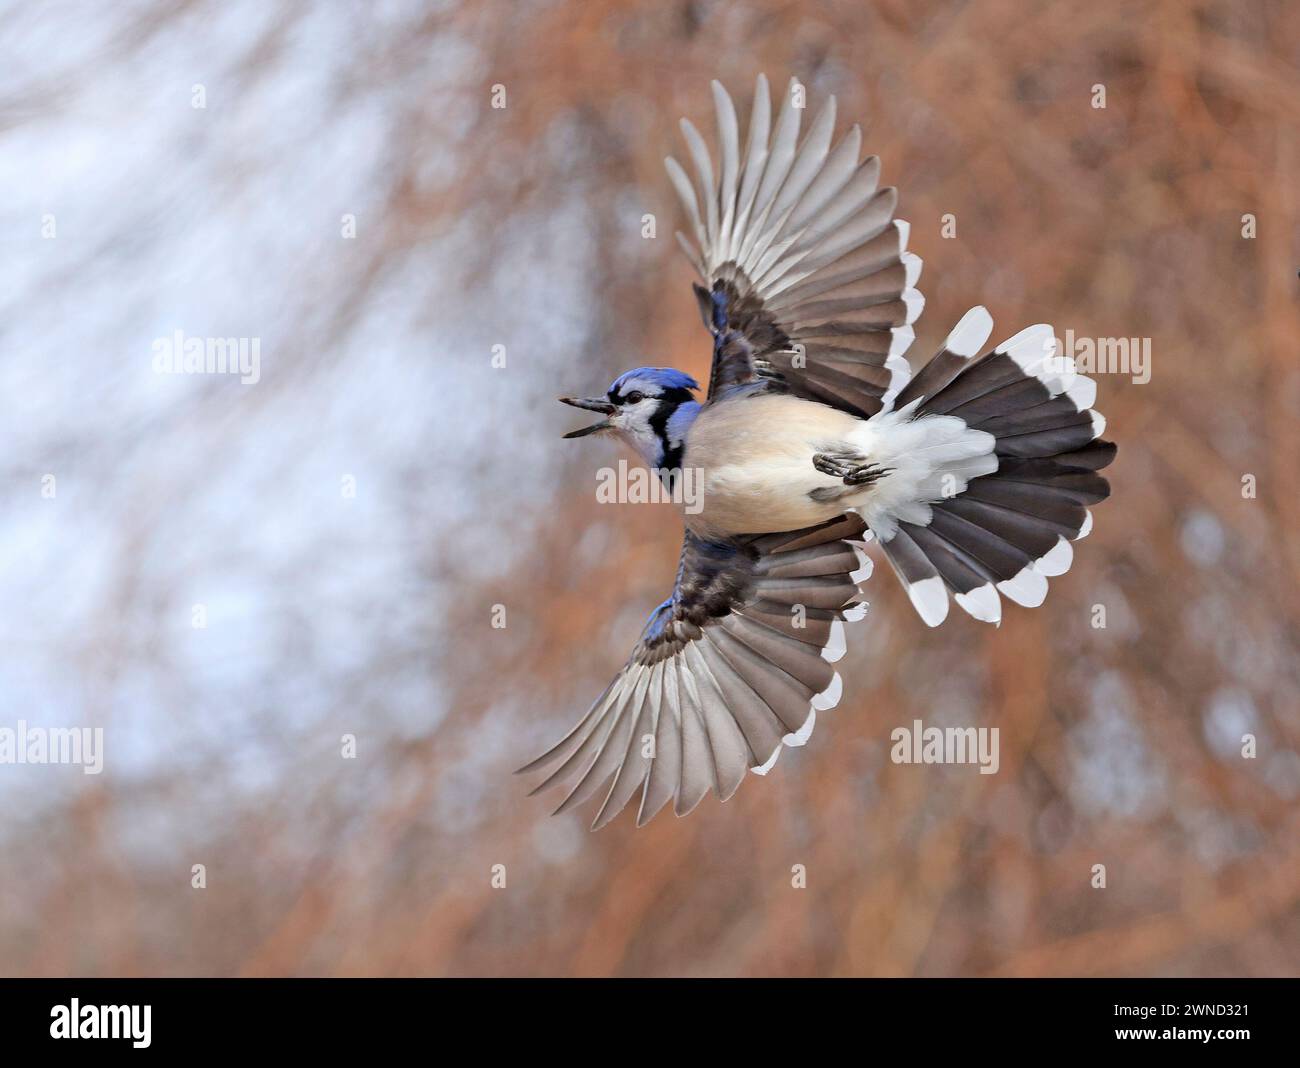 Blue Jay hovering in mid-air, Canada Stock Photo